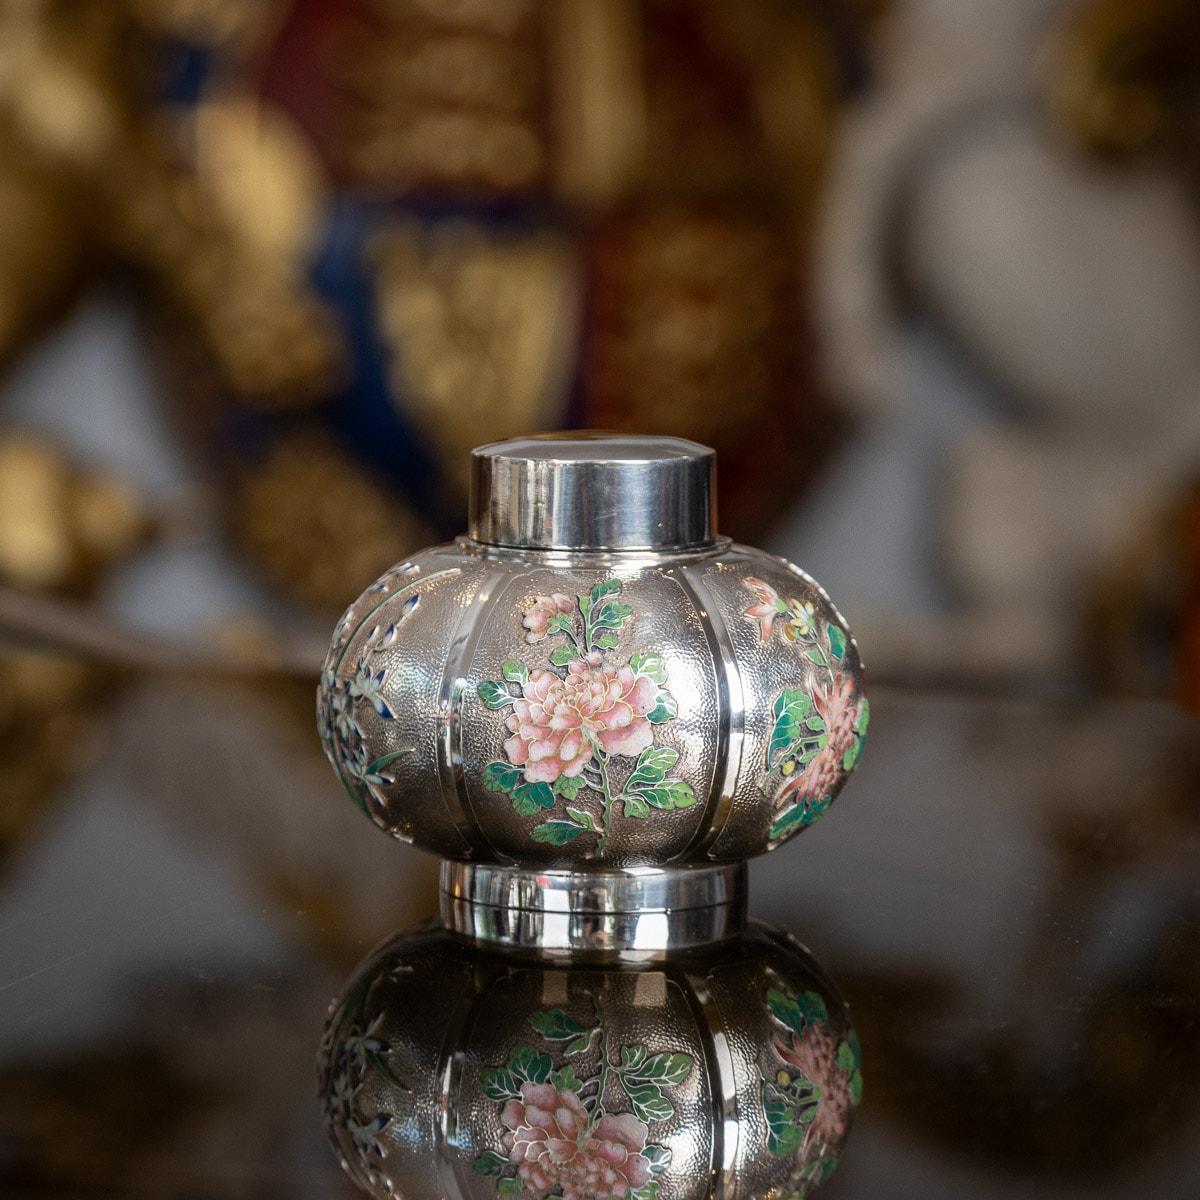 Antique early-20th Century Extremely Rare Chinese export solid silver & enamel tea caddy, the melon shaped body sides are applied with shaded enamels, depicting blooming chrysanthemums & iris flowers on matted ground. The caddy is of good